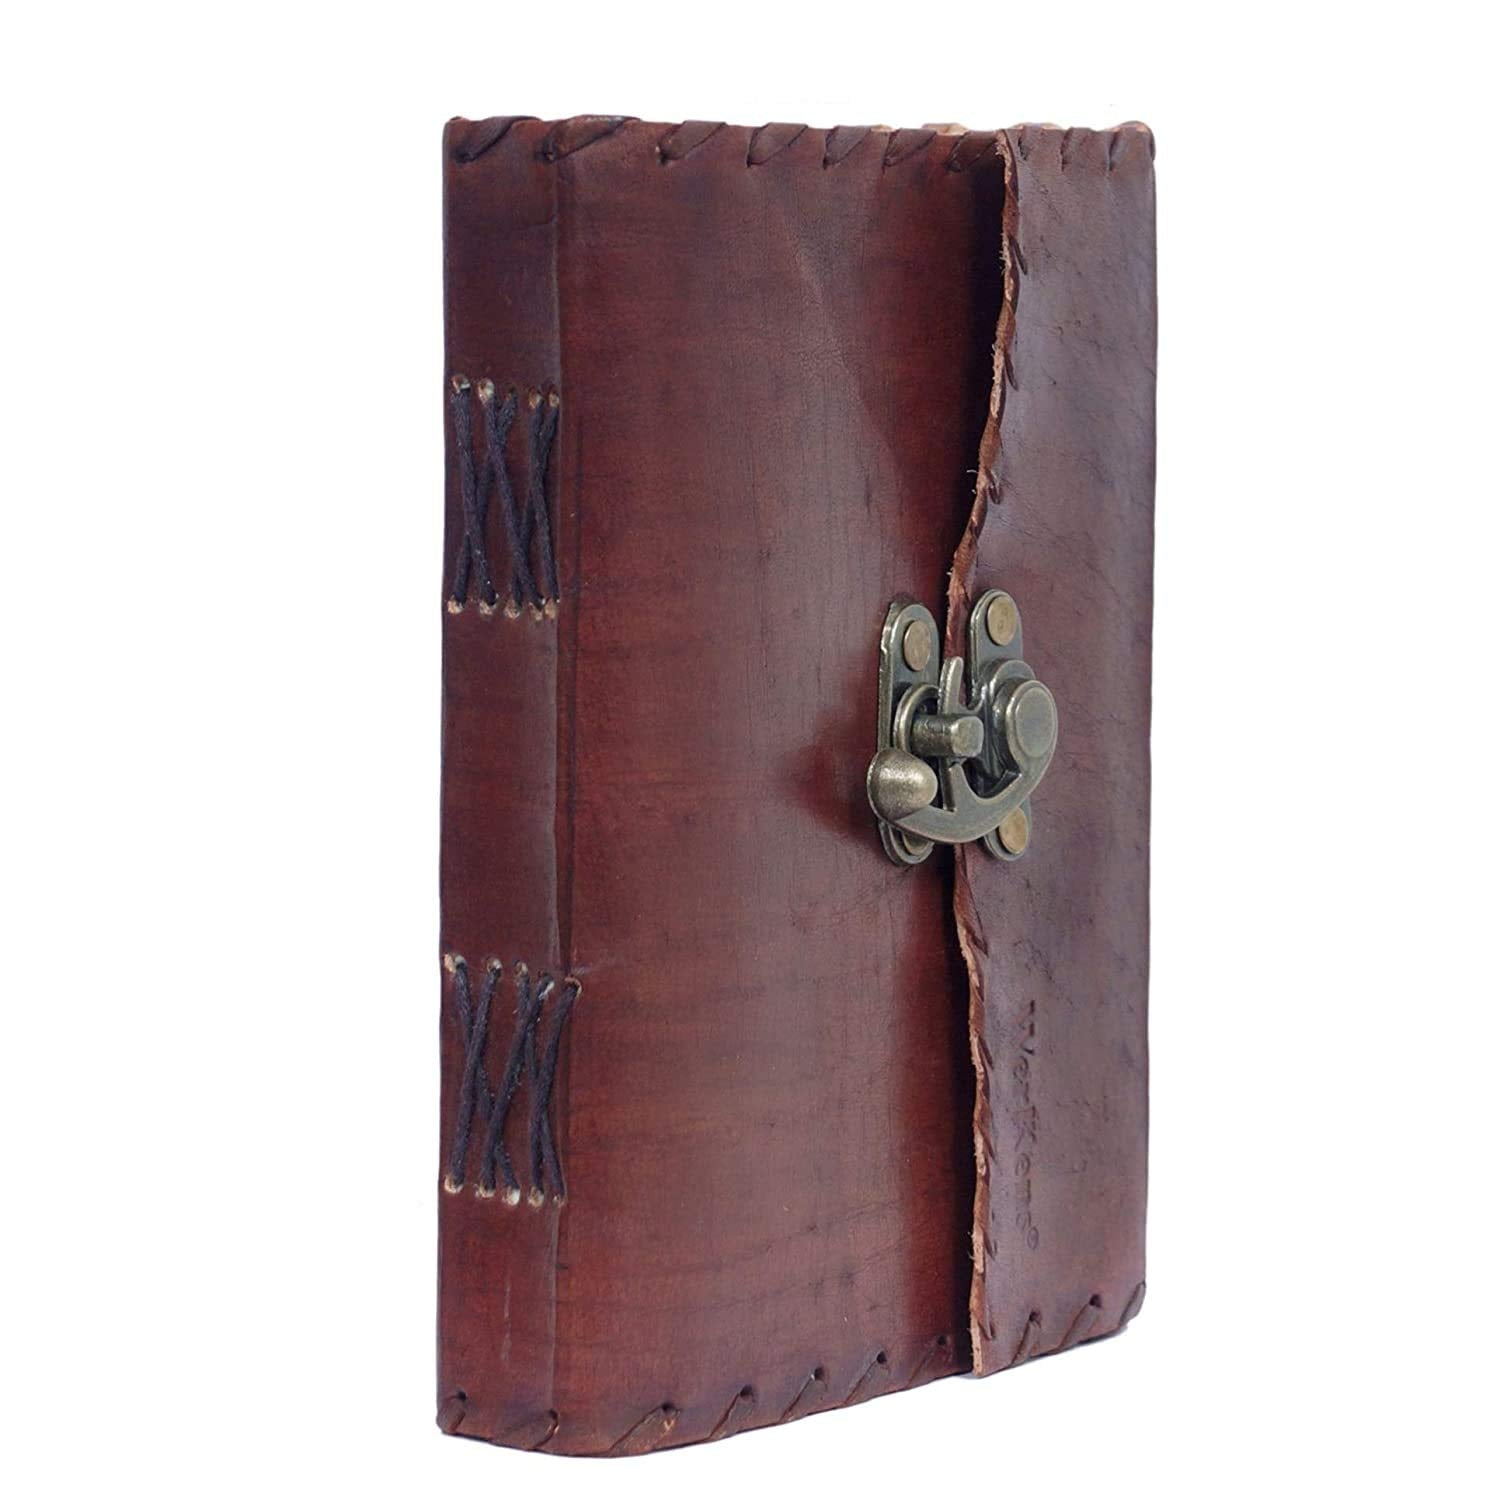 Classic Leather Journal Diary Vintage Exclusive Handcrafted Paper Plain